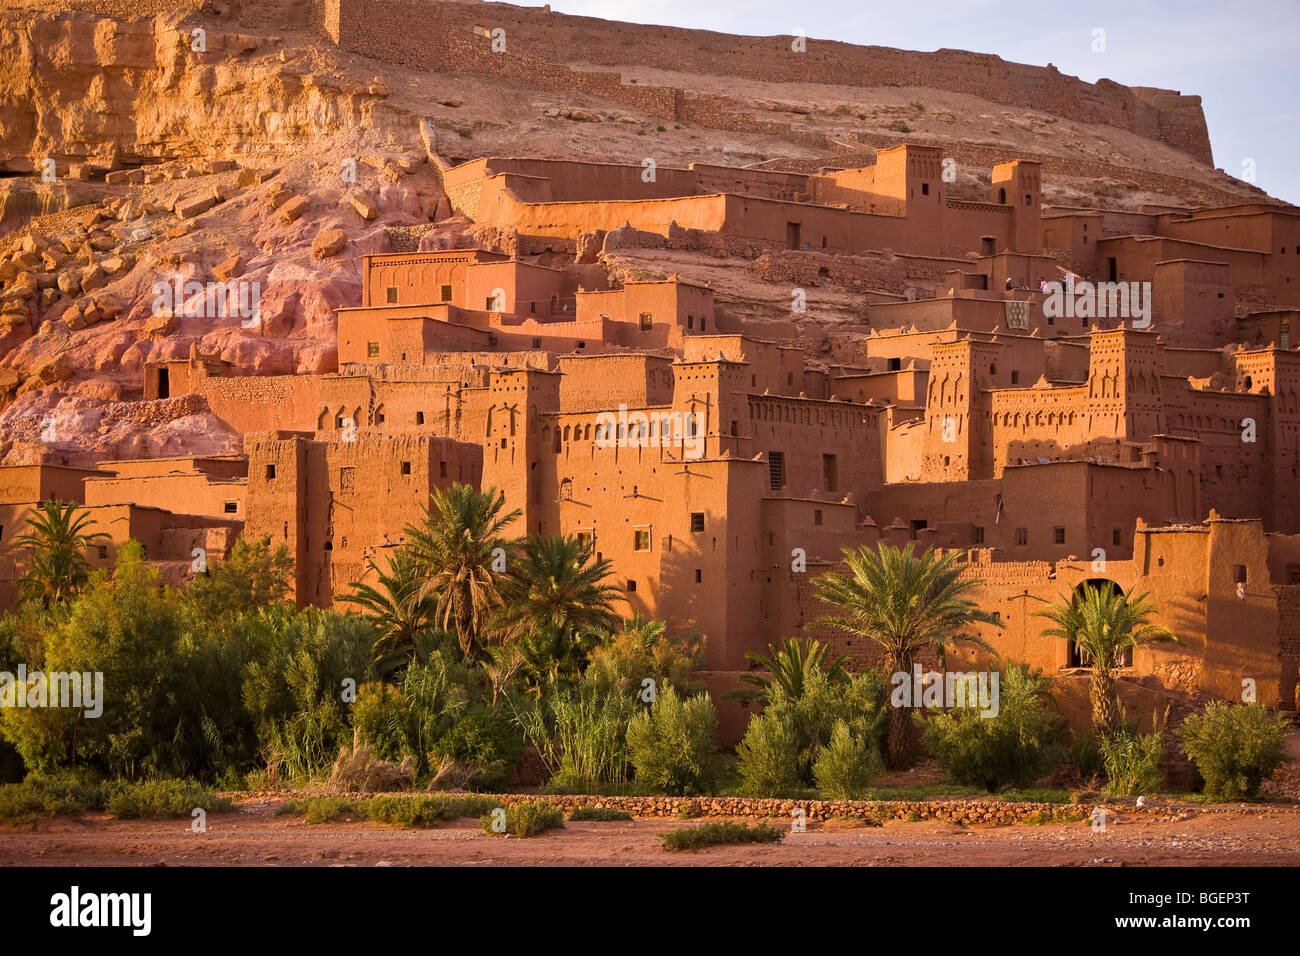 OUARZAZATE PROVINCE, MOROCCO - Ksar at Ait Benhaddou. This fortified mudbrick kasbah is a UNESCO World Heritage Site. Stock Photo